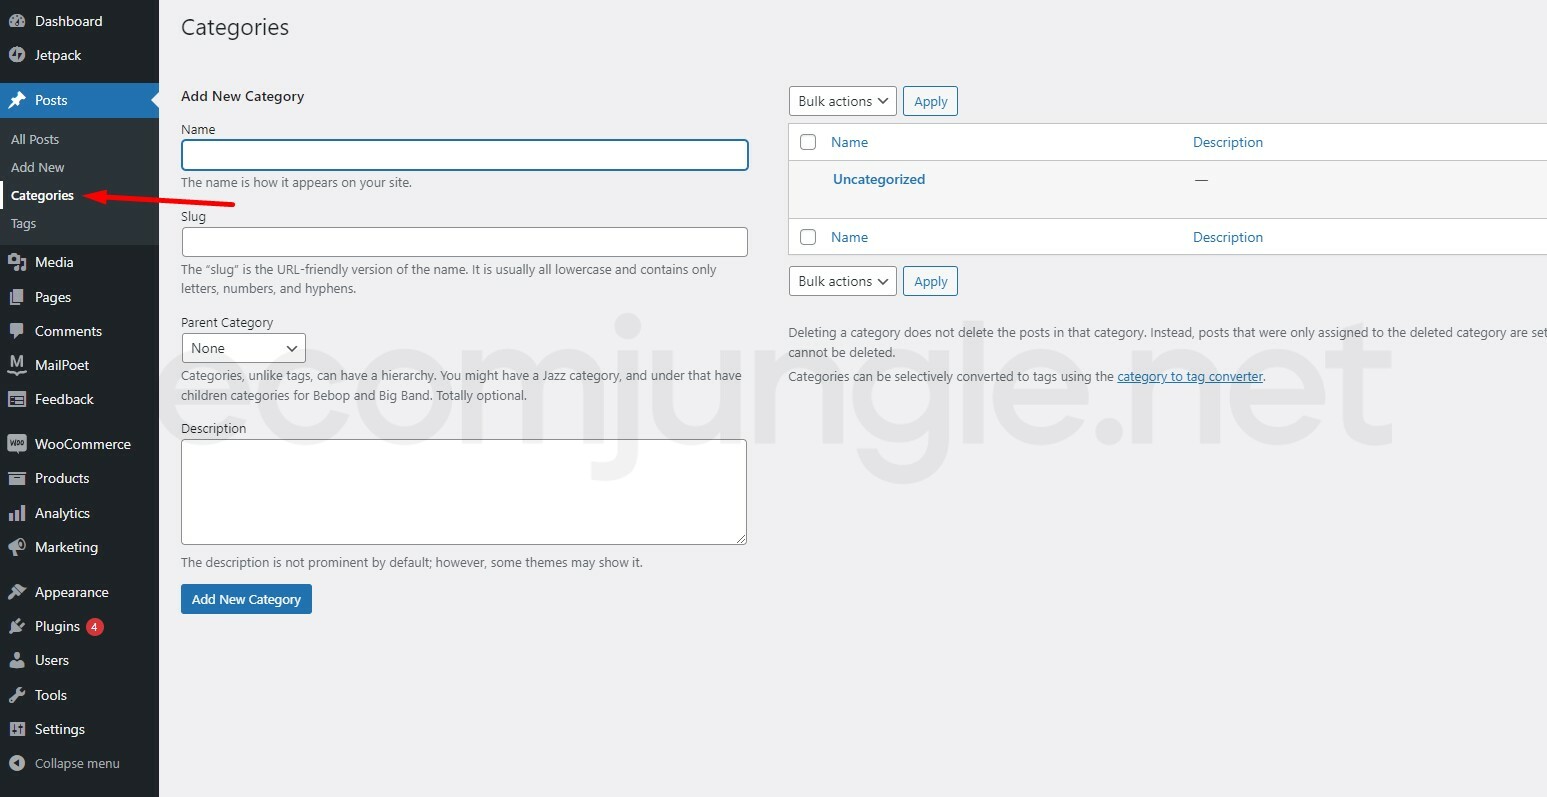 Categories allow you to organize your posts into similar groups